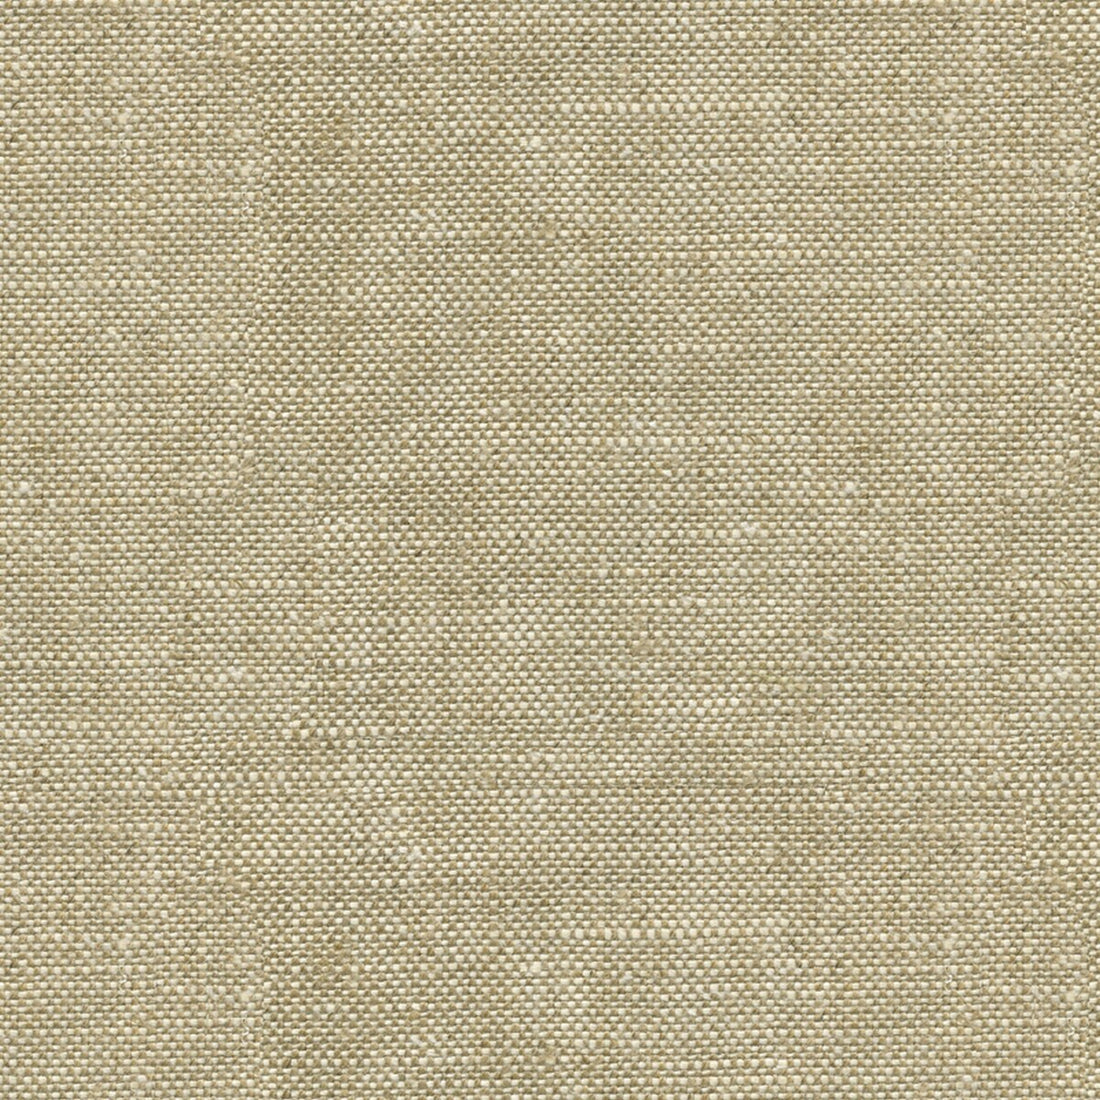 Weekend Linen fabric in buff color - pattern FD698.K113.0 - by Mulberry in the Crayford collection